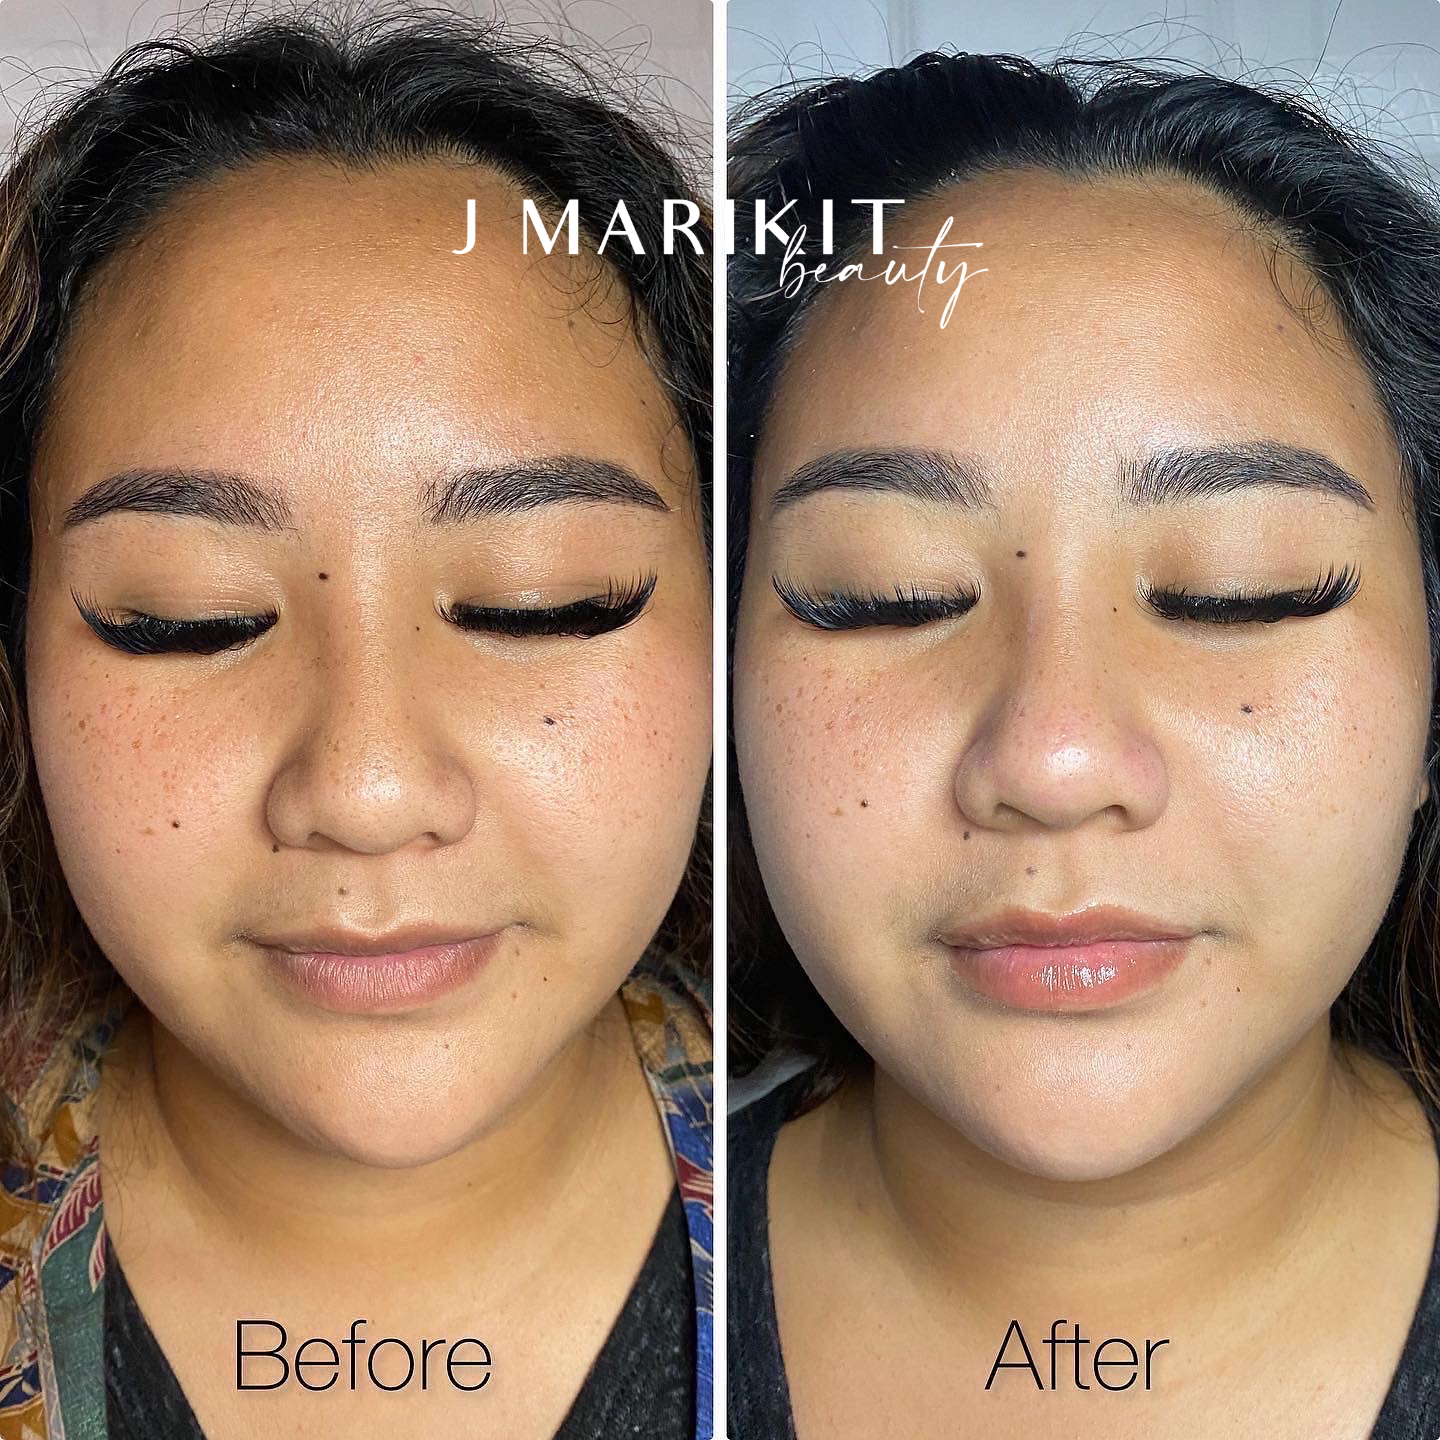 Before and after images of JMarkit client.